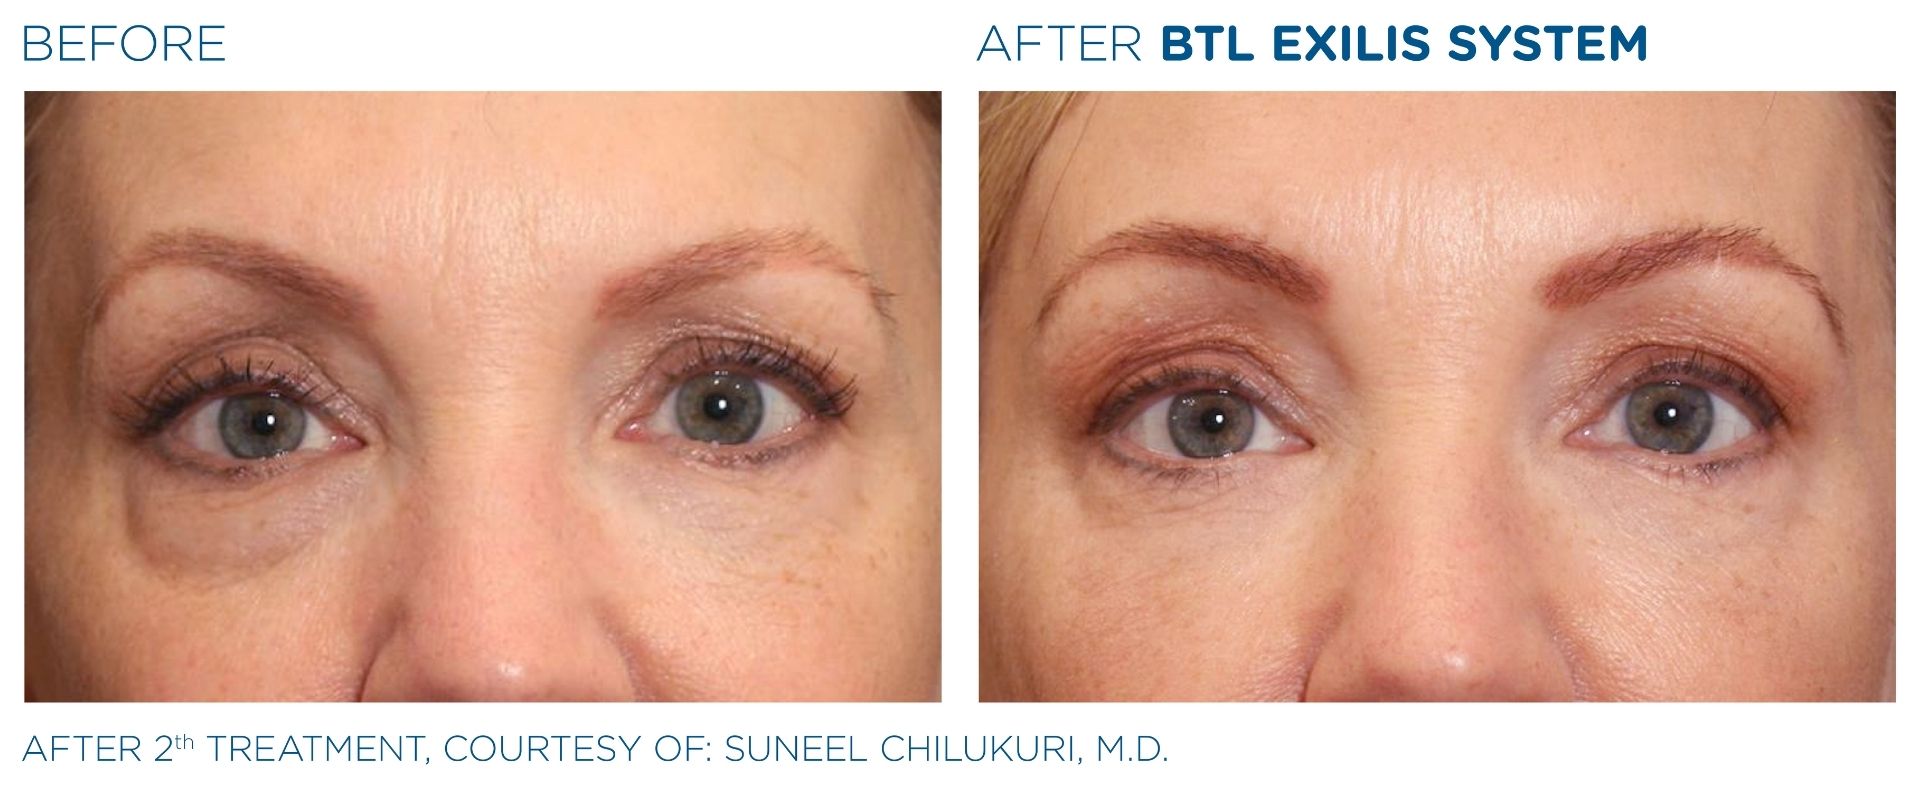 Eyes Before & After Using the Exilis System